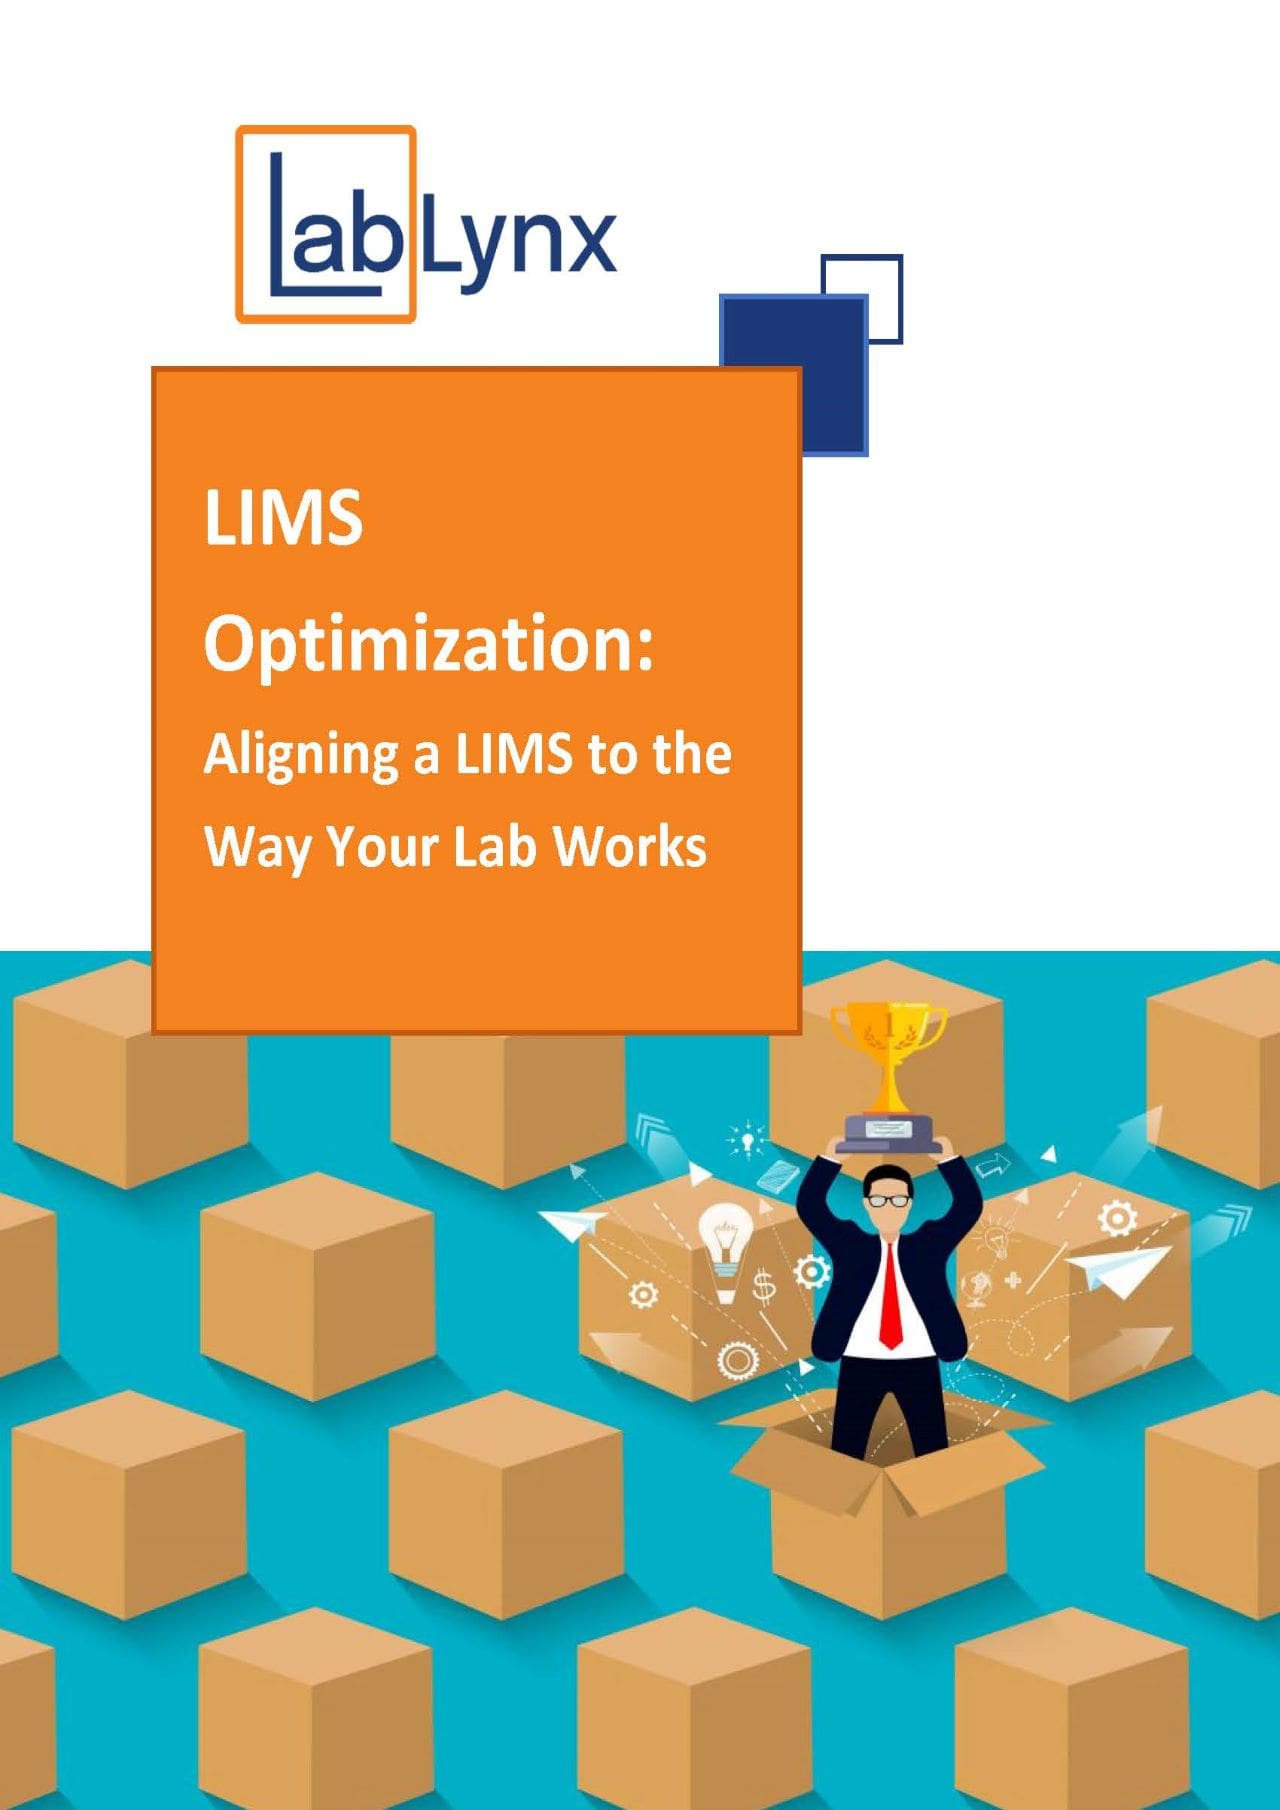 LIMS Optimization: Aligning a LIMS to the Way Your Lab Works | Brochures | LabLynx